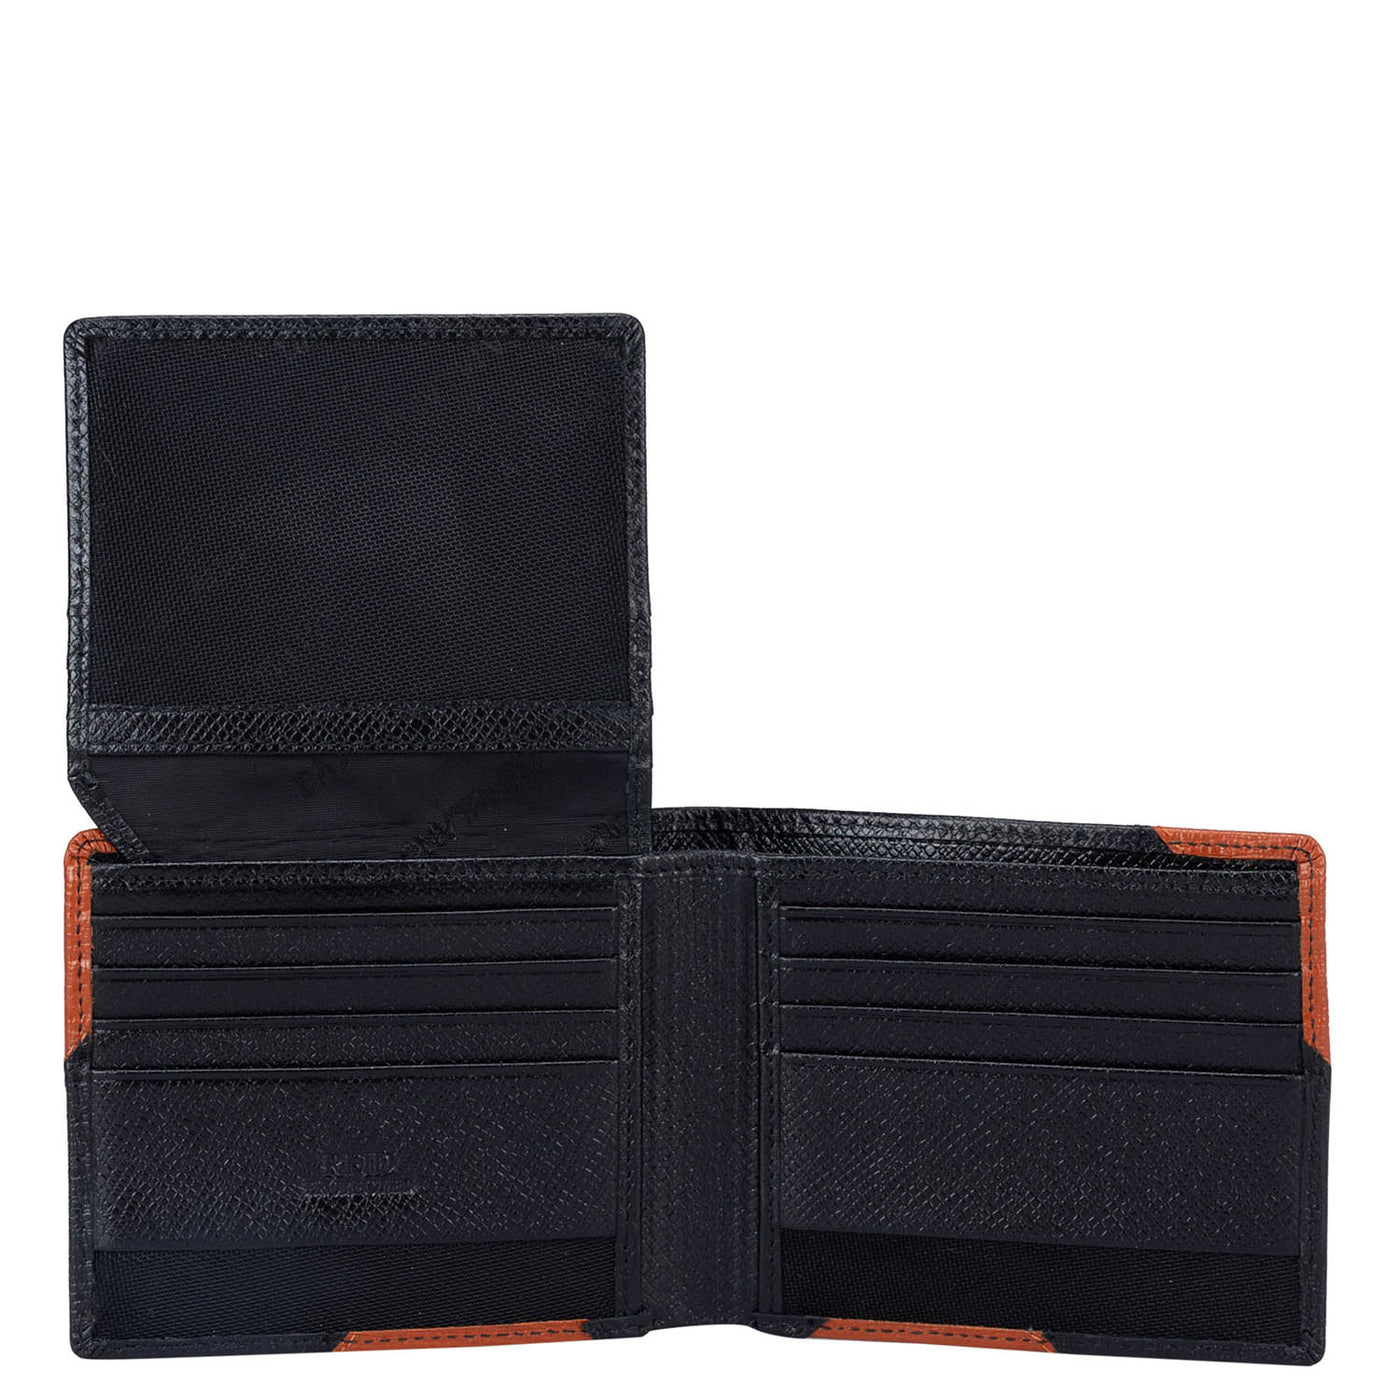 Franzy Leather Mens Wallet - Black & Rust